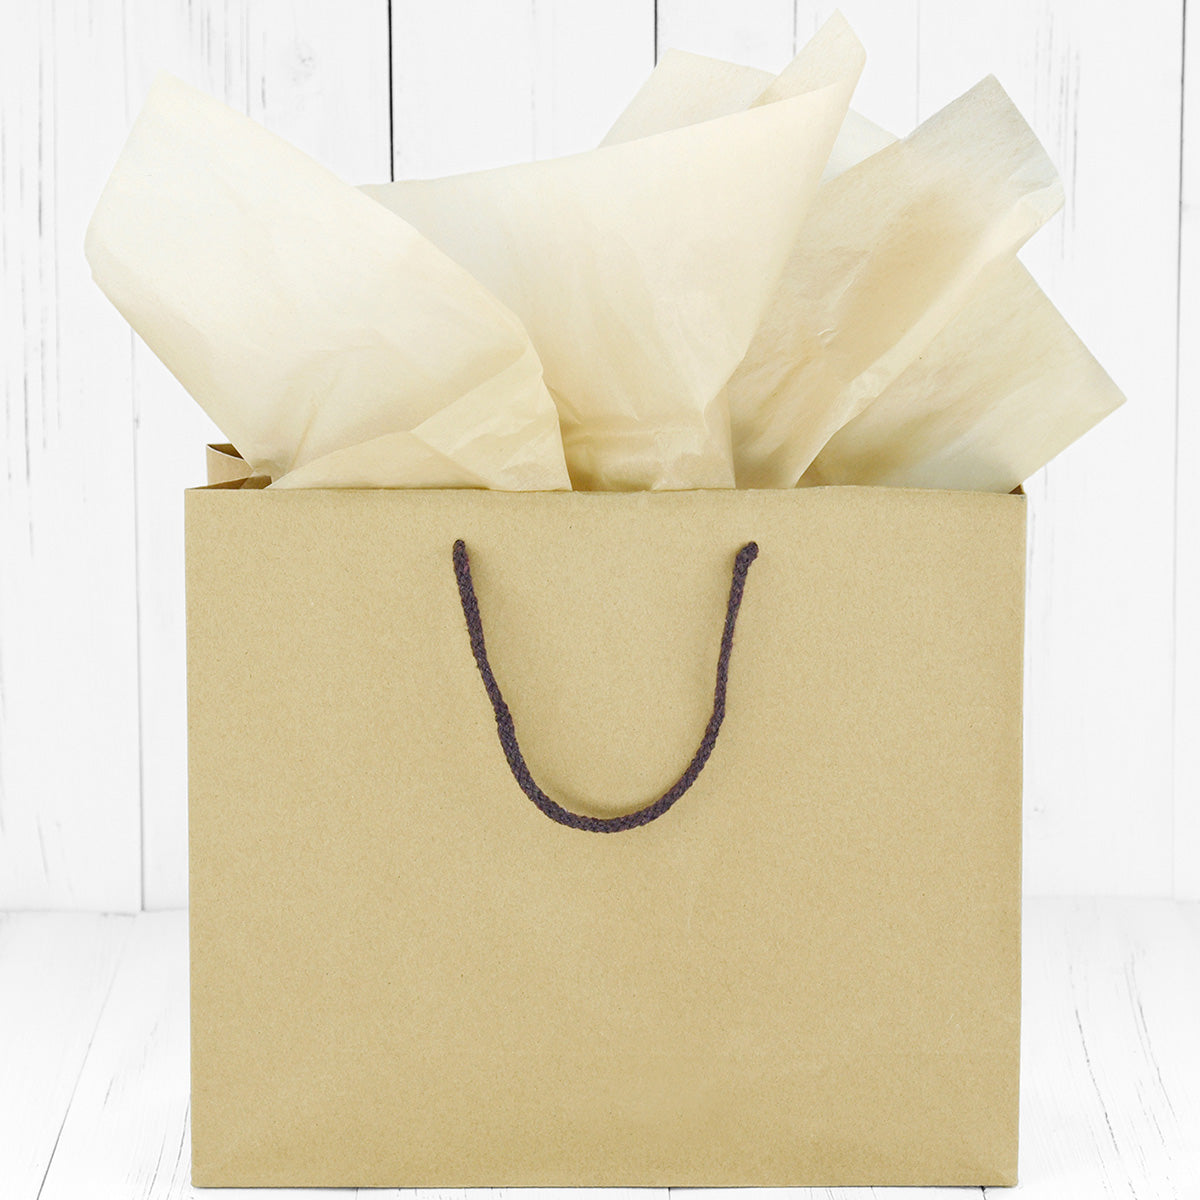 50 Sheets Beige Wrapping Tissue Paper